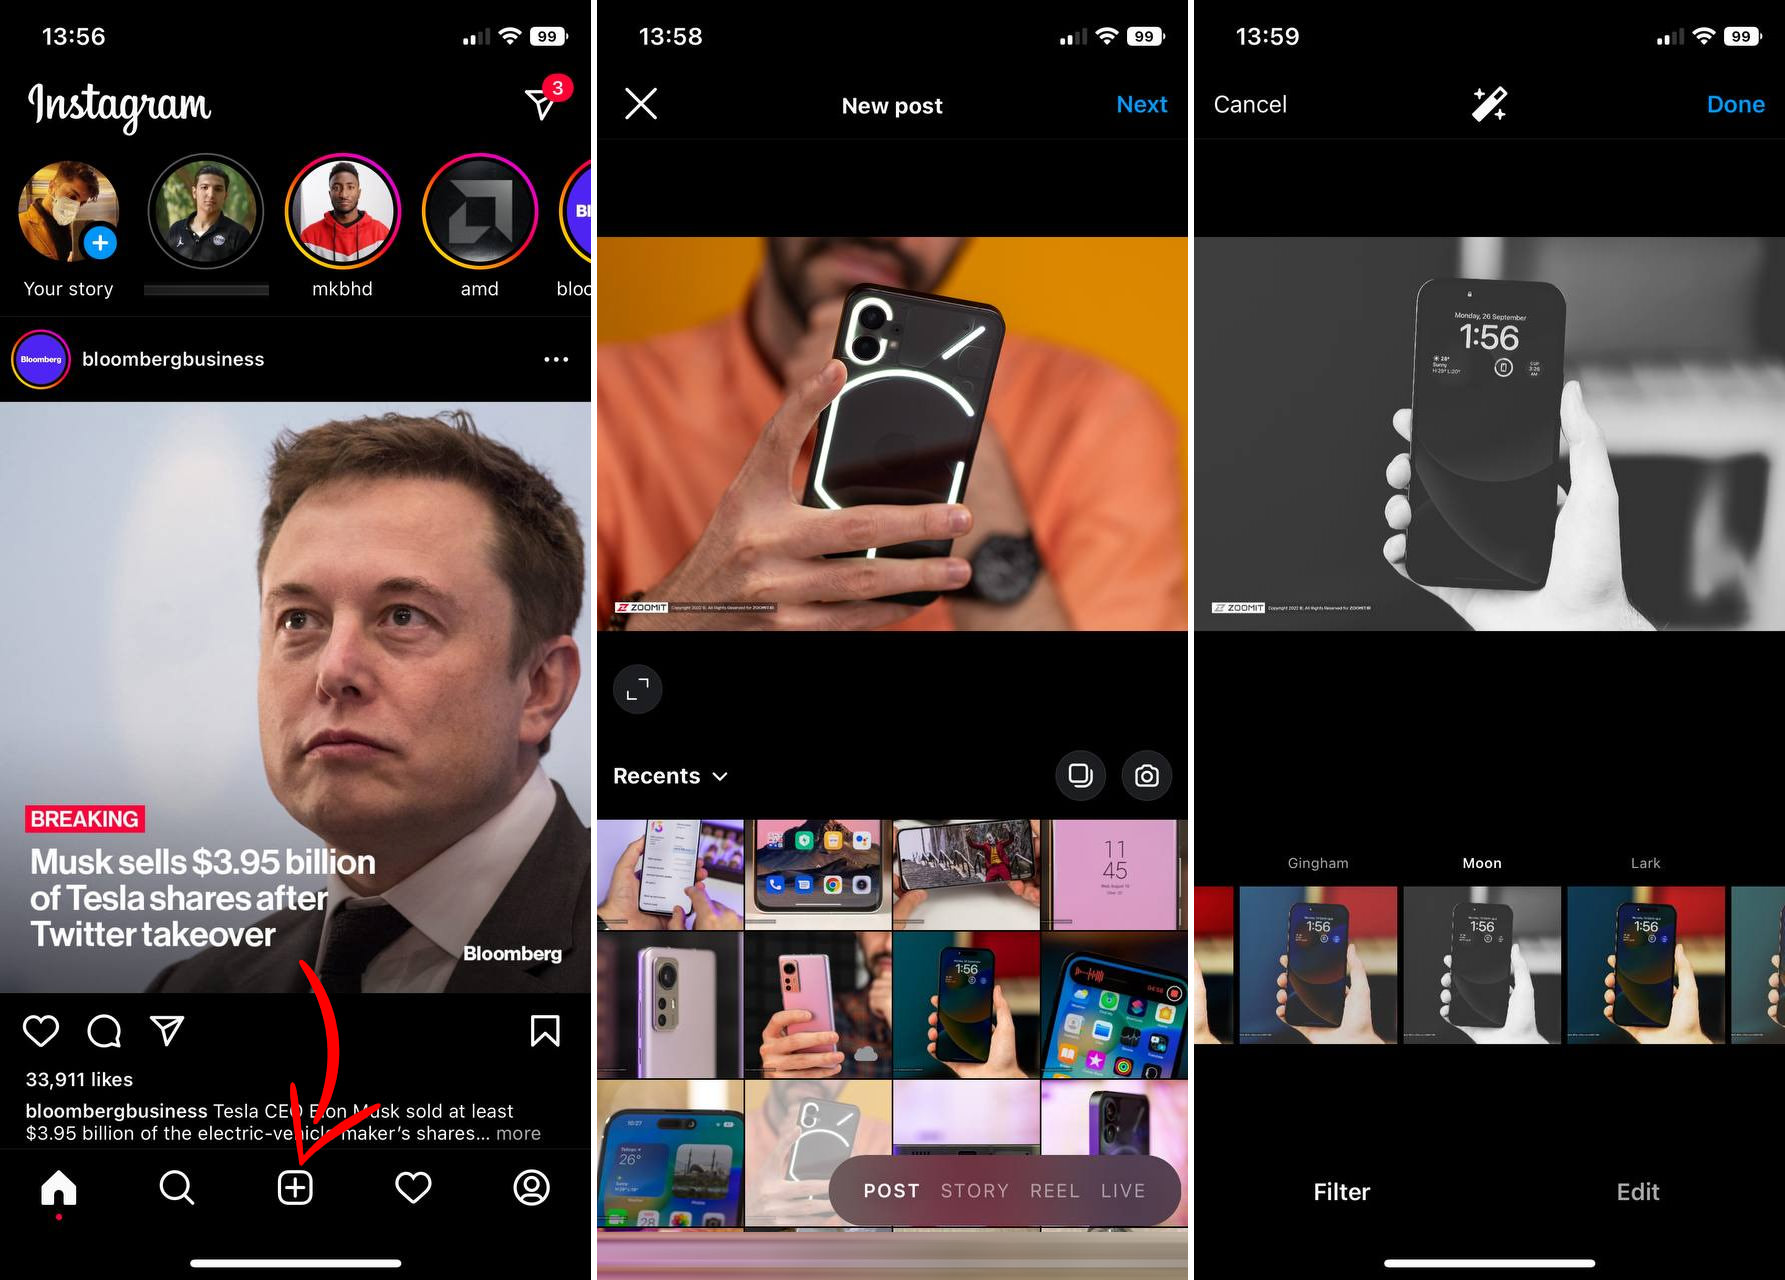 How to send an Instagram post on iPhone iOS image of Elon Musk